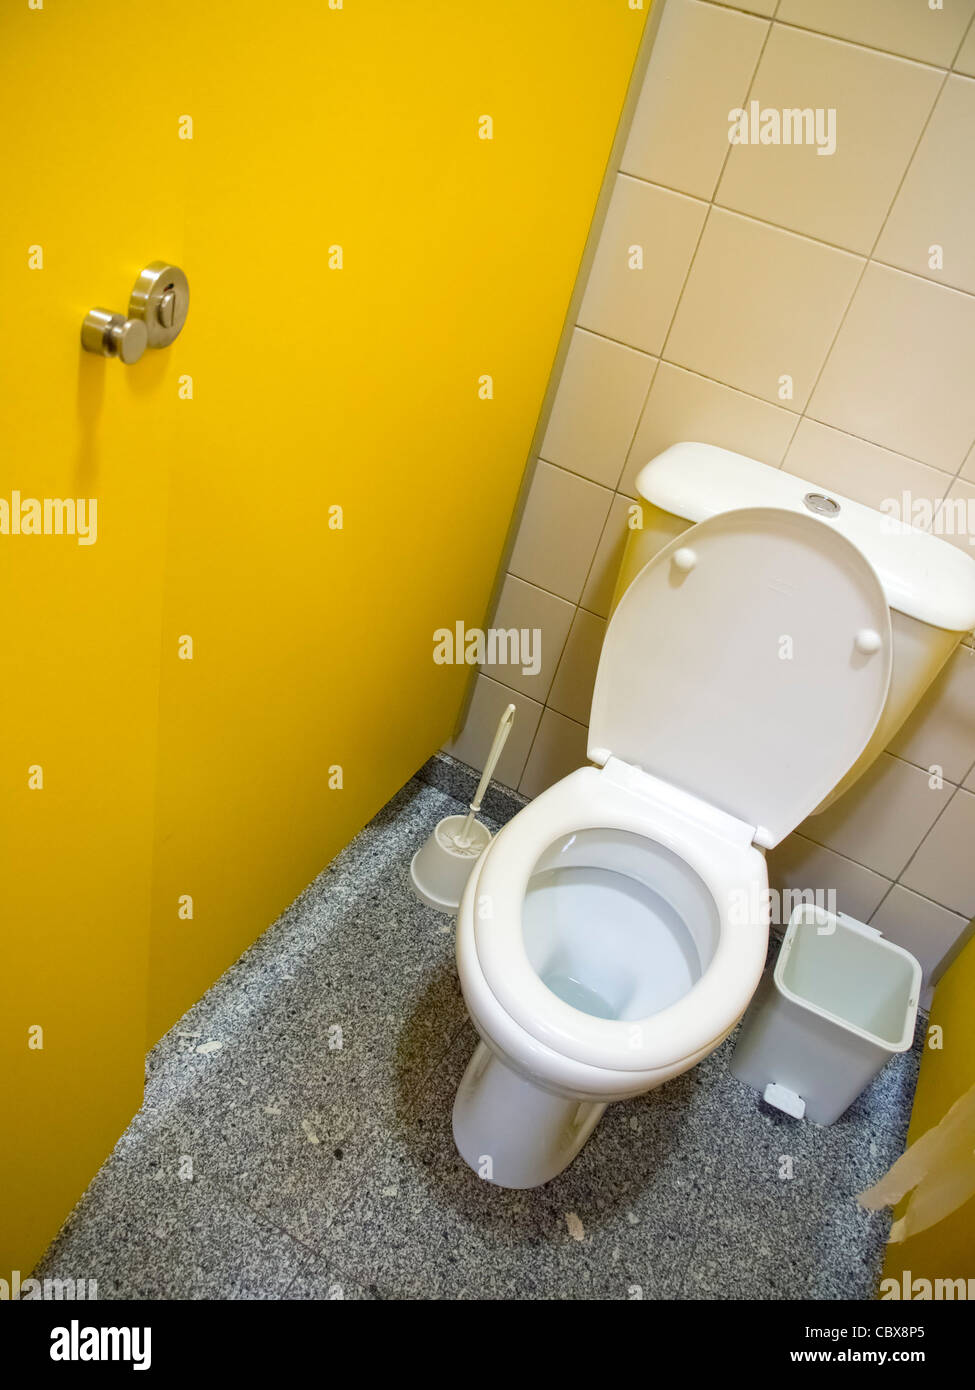 Toilet in a public restroom viewed from above Stock Photo